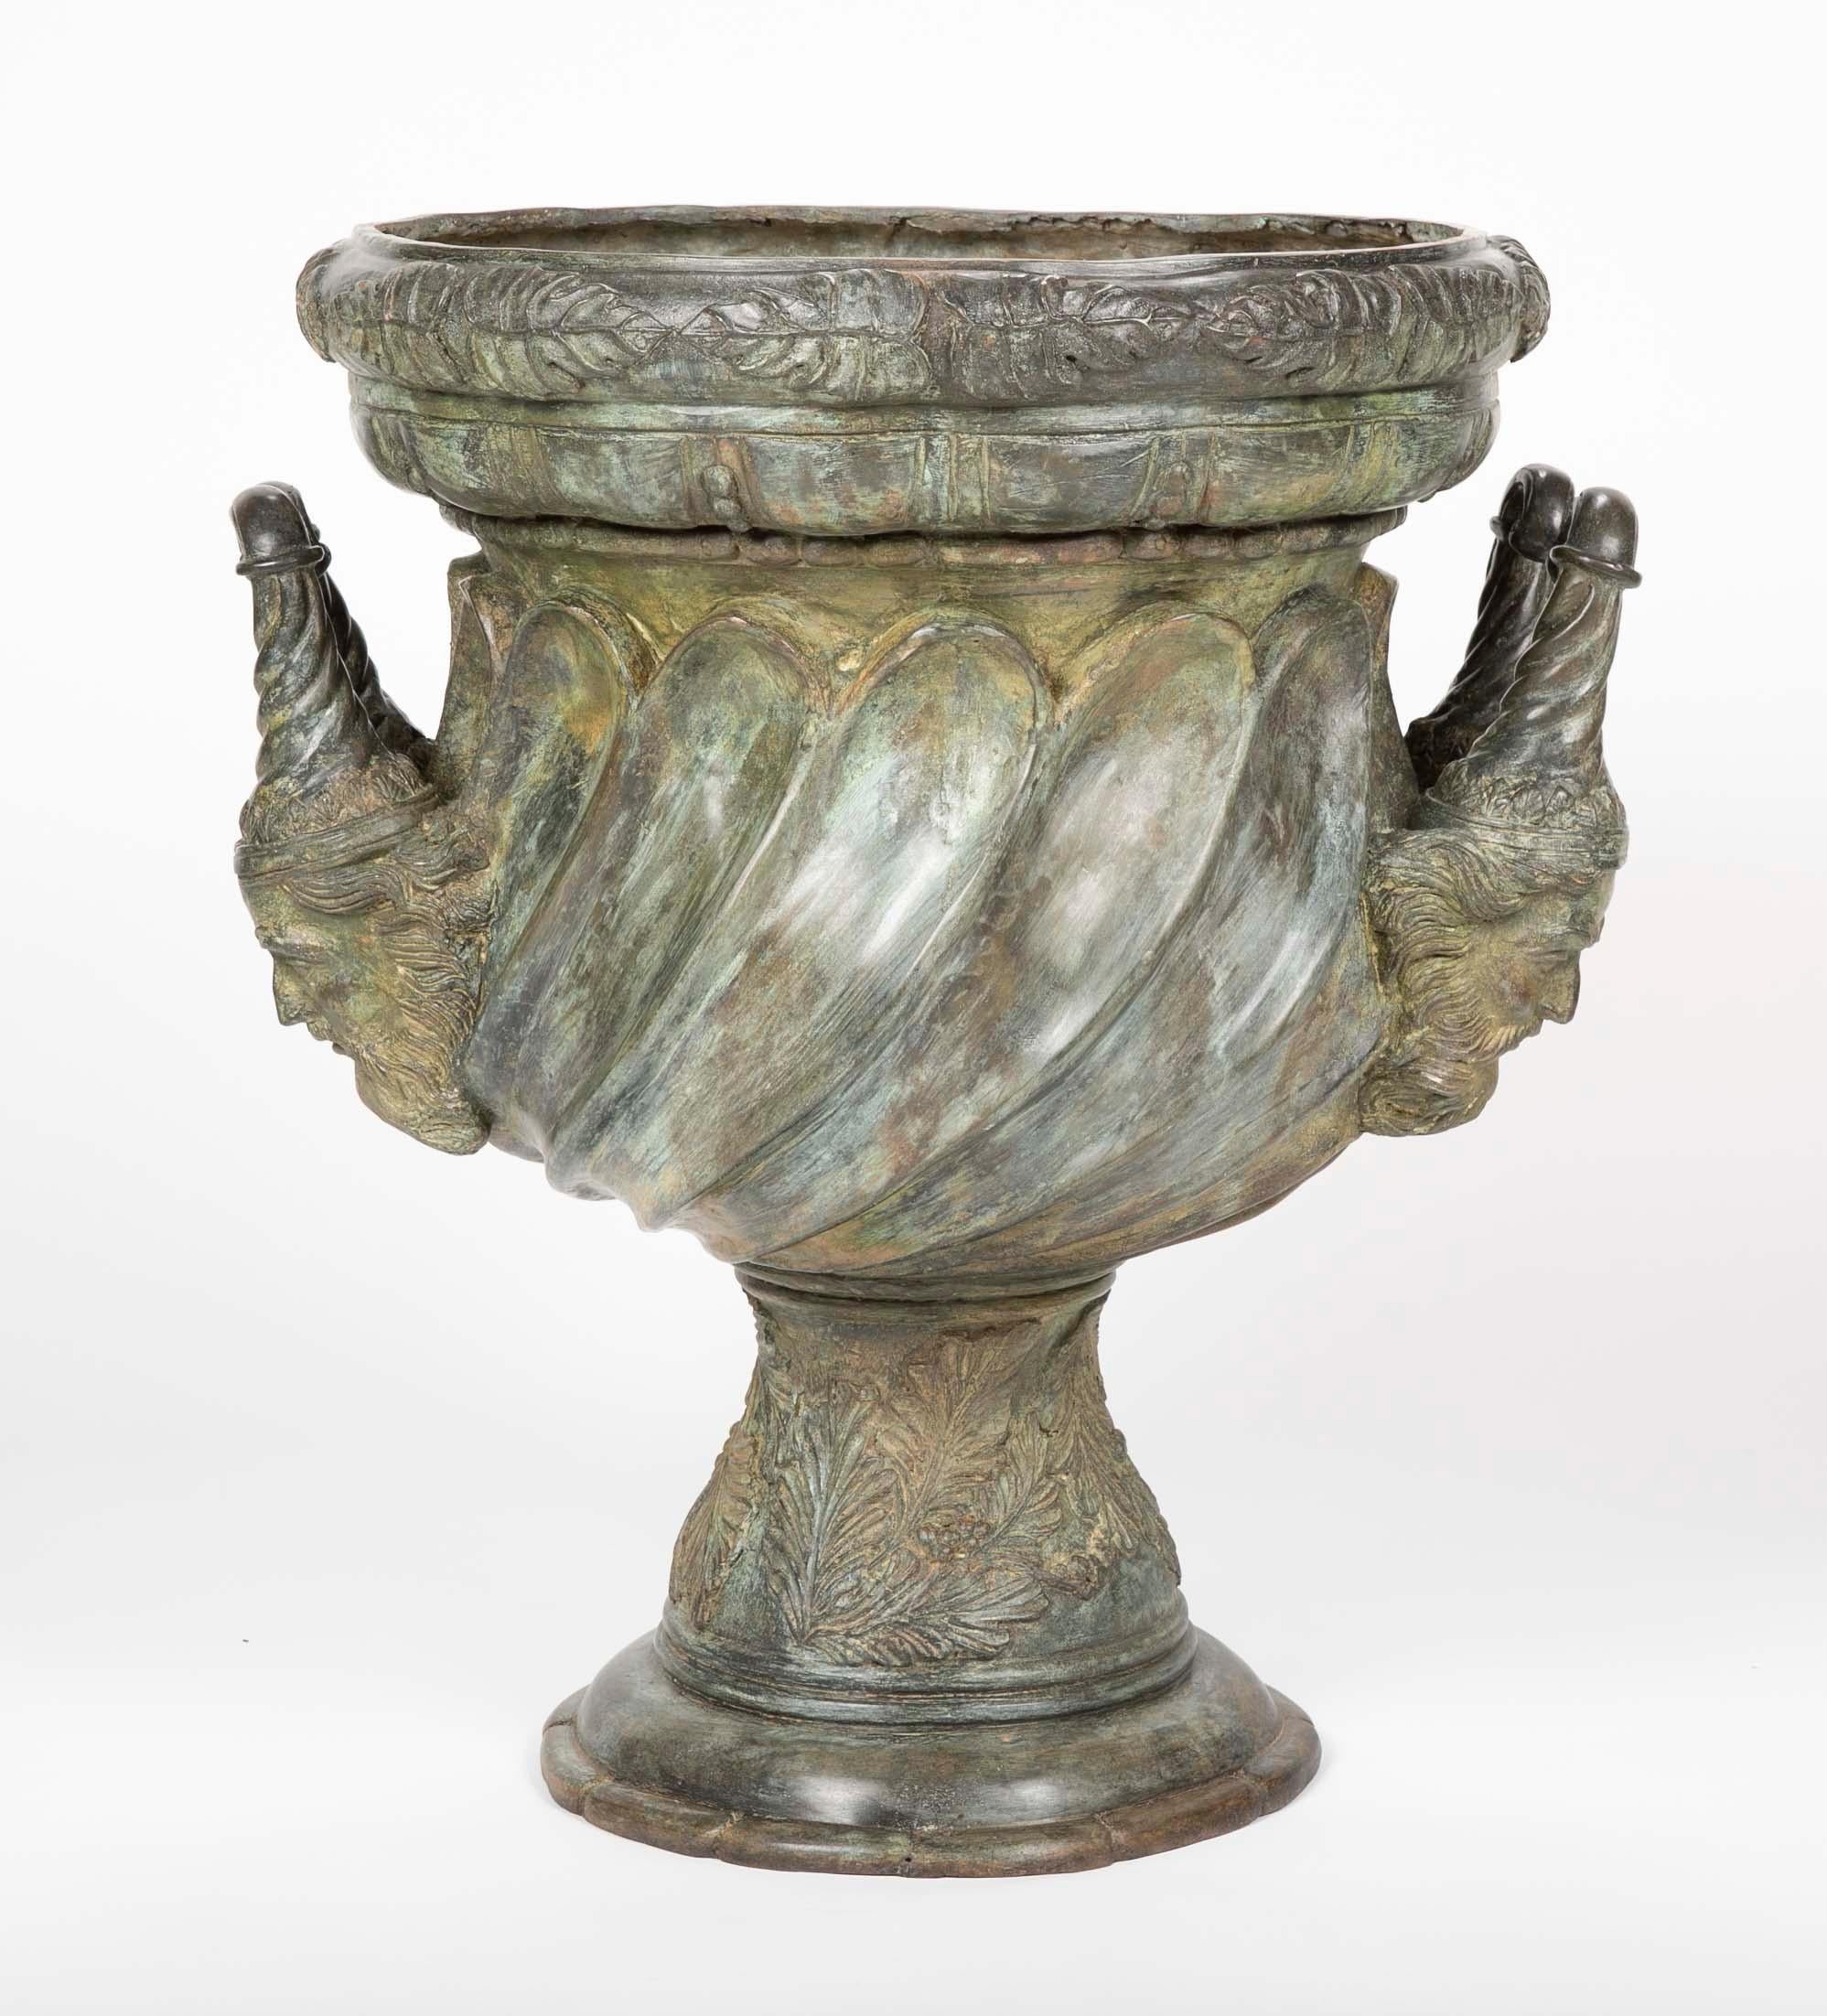 A substantial bronze garden urn with handles in the form of a bearded men having exceptional patination. After a model from the Palace of Versailles by Claude Ballin.

Copy of 1665 urn by Claude Ballin at Versailles. 